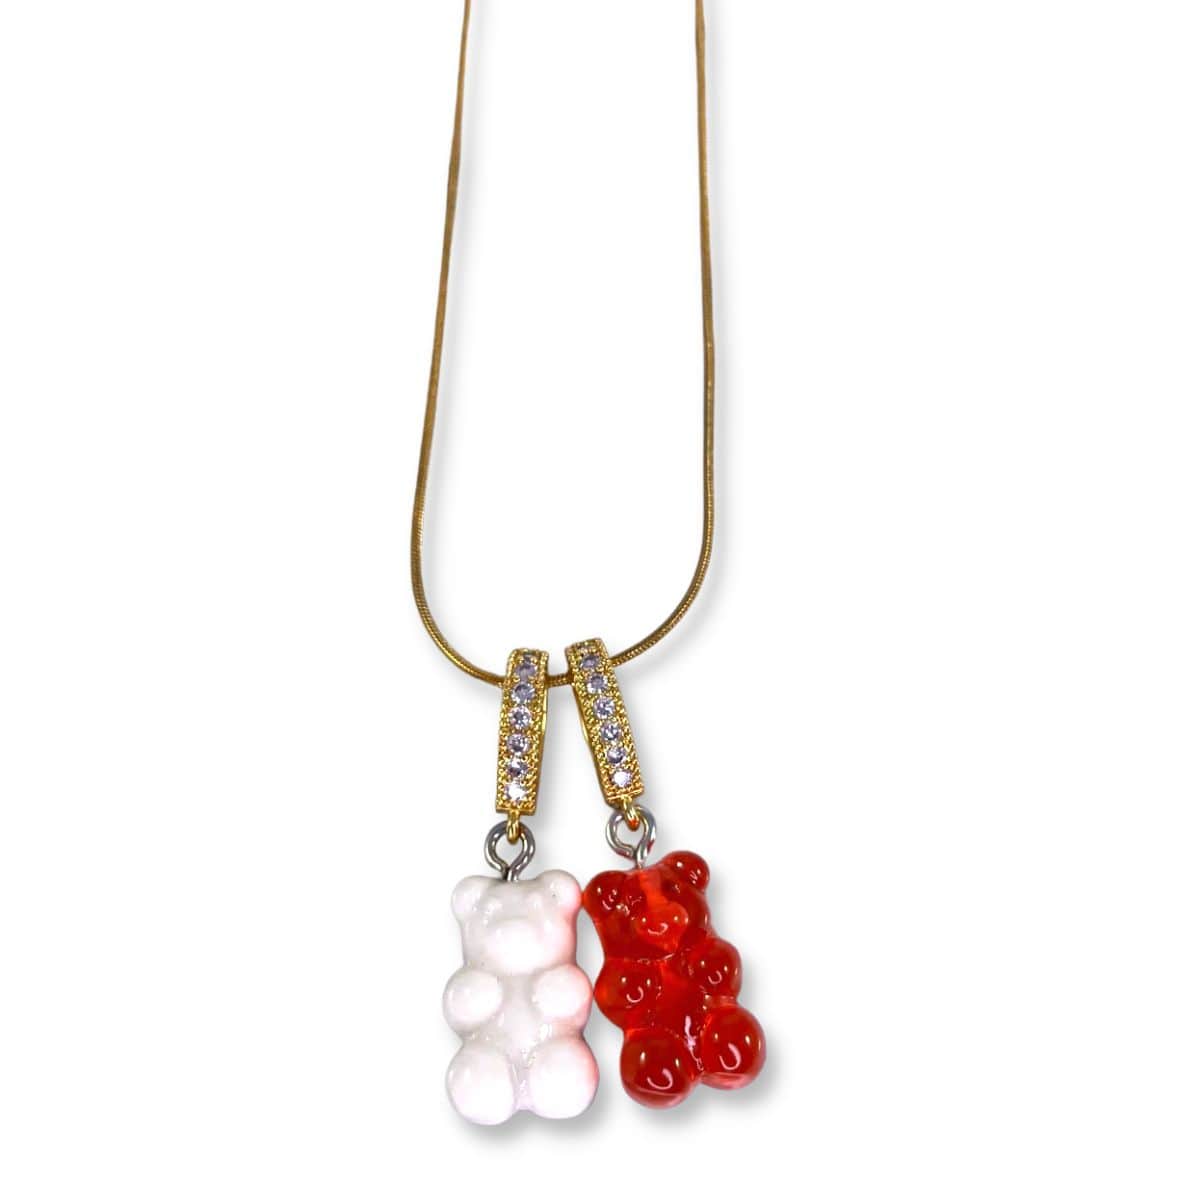 Candy Cane Double Bear Necklace - Gummy Bear Bling